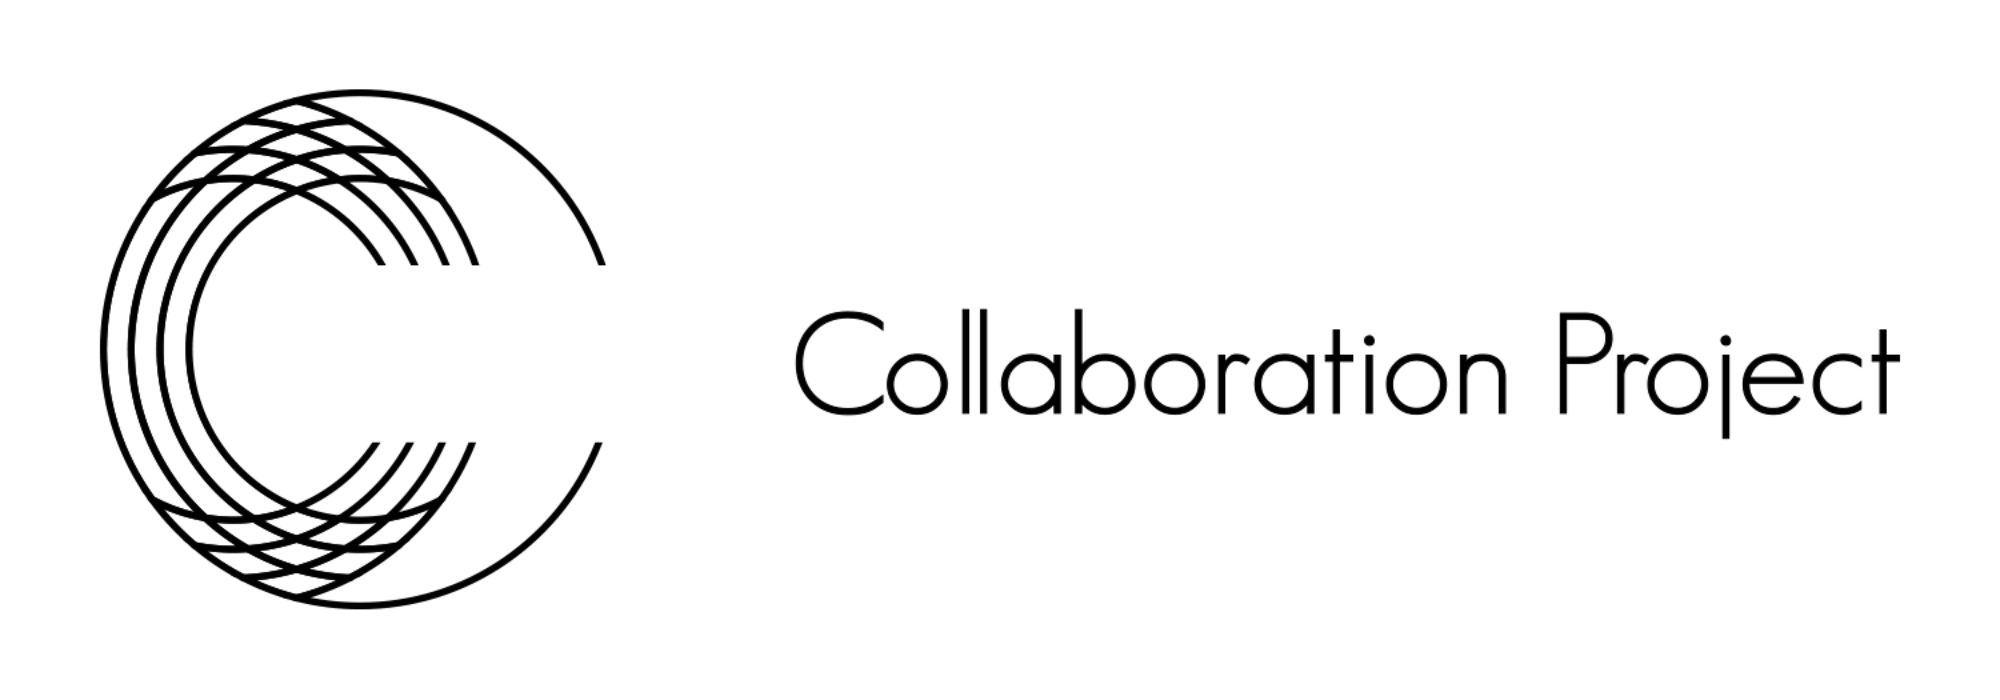 Collaboration project